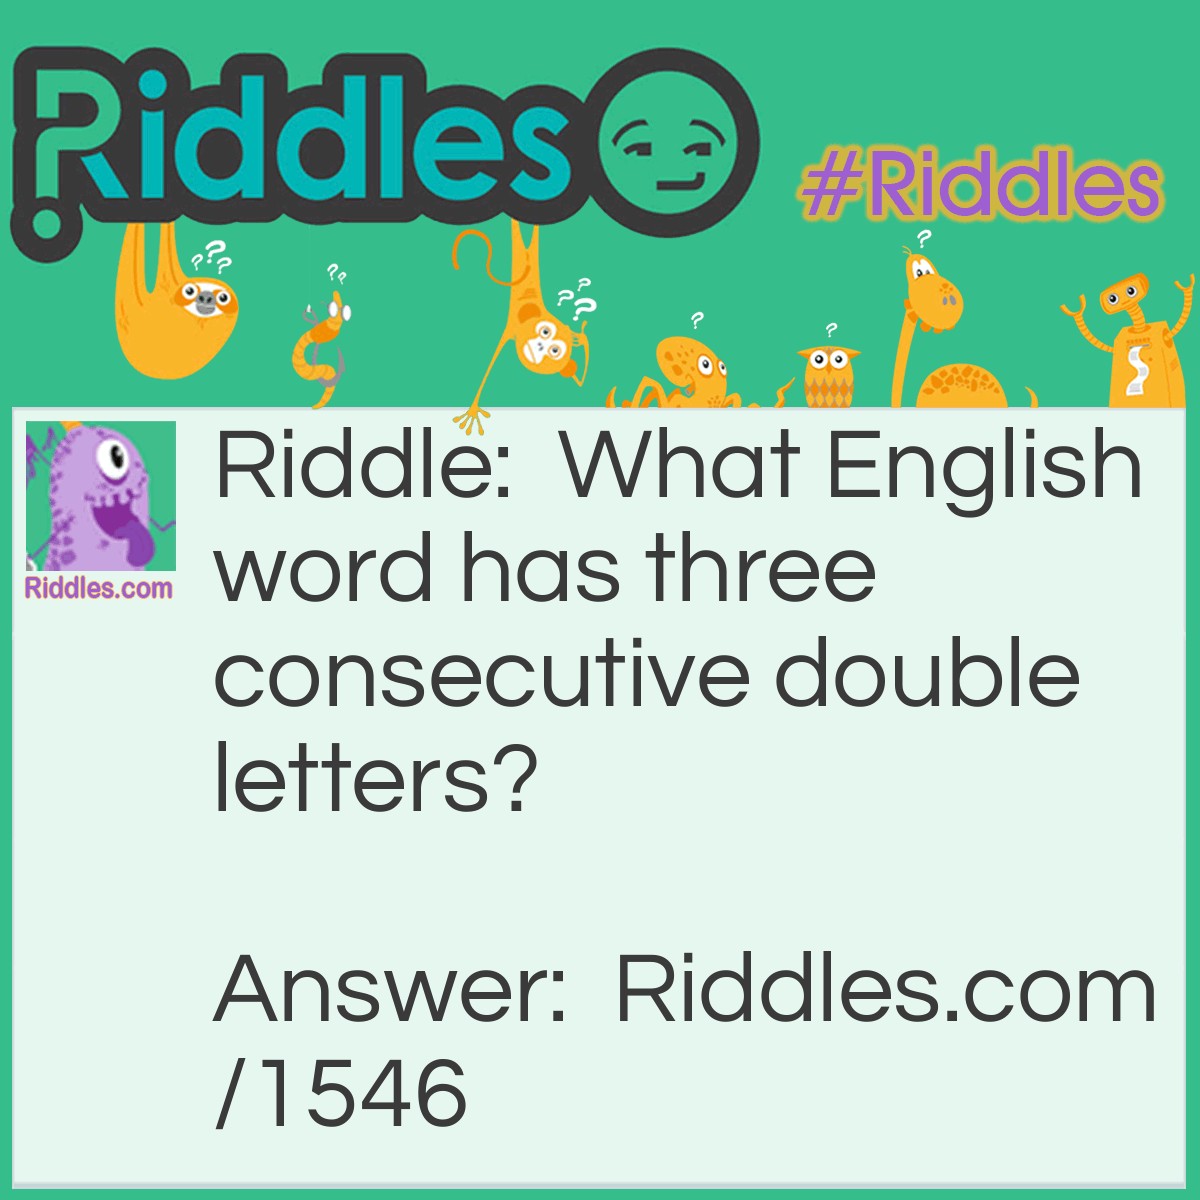 Riddle: What English word has three consecutive double letters? Answer: Bookkeeper